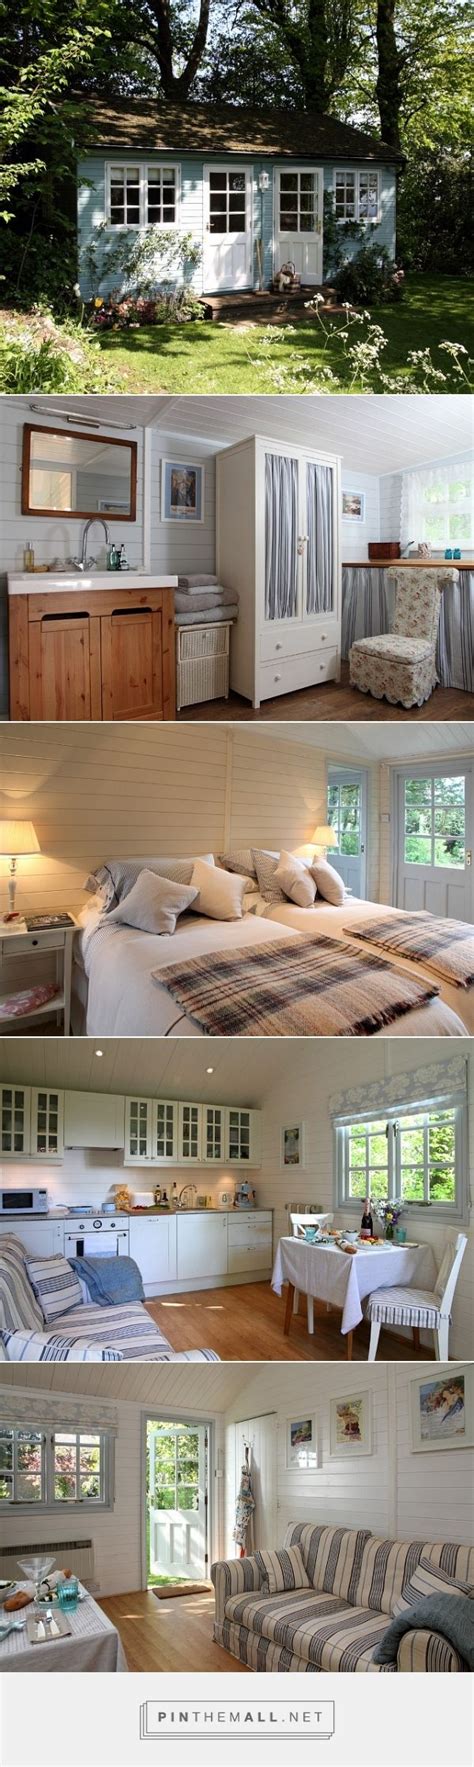 Cozy Beach Cabin The Tiny Life A Grouped Images Picture